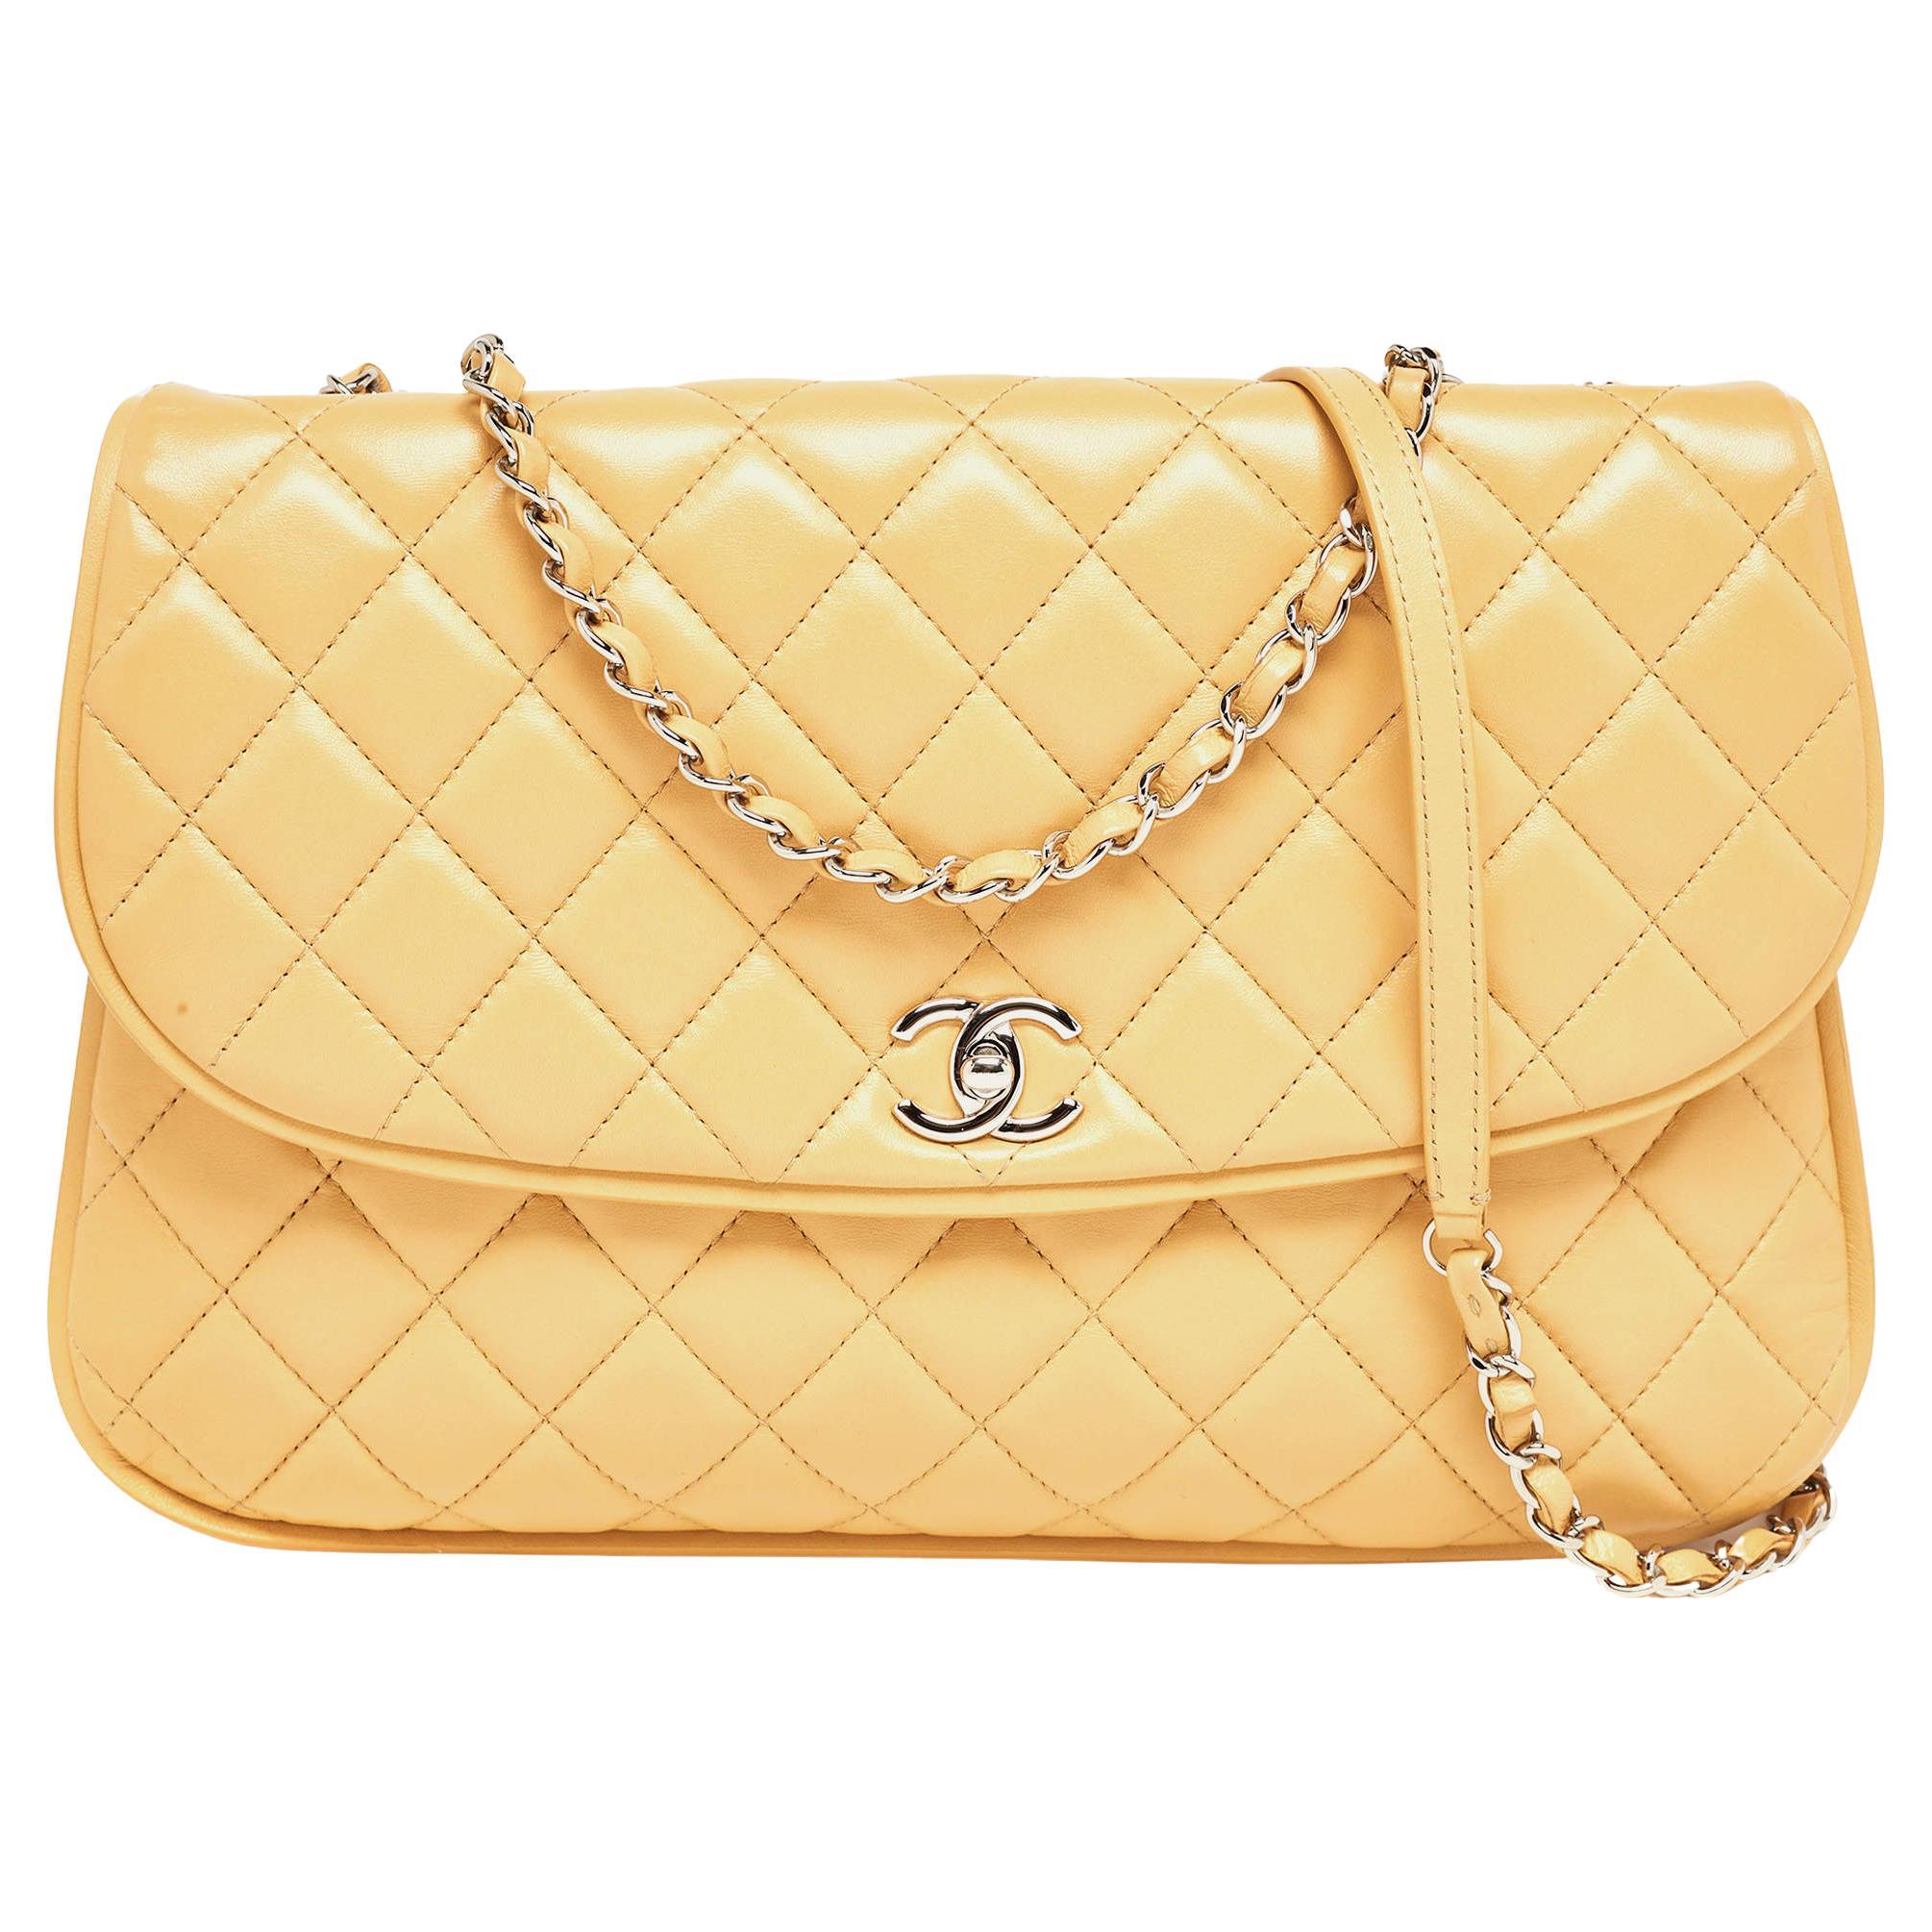 Chanel Yellow Quilted Leather Large Pagode Piping Flap Bag For Sale